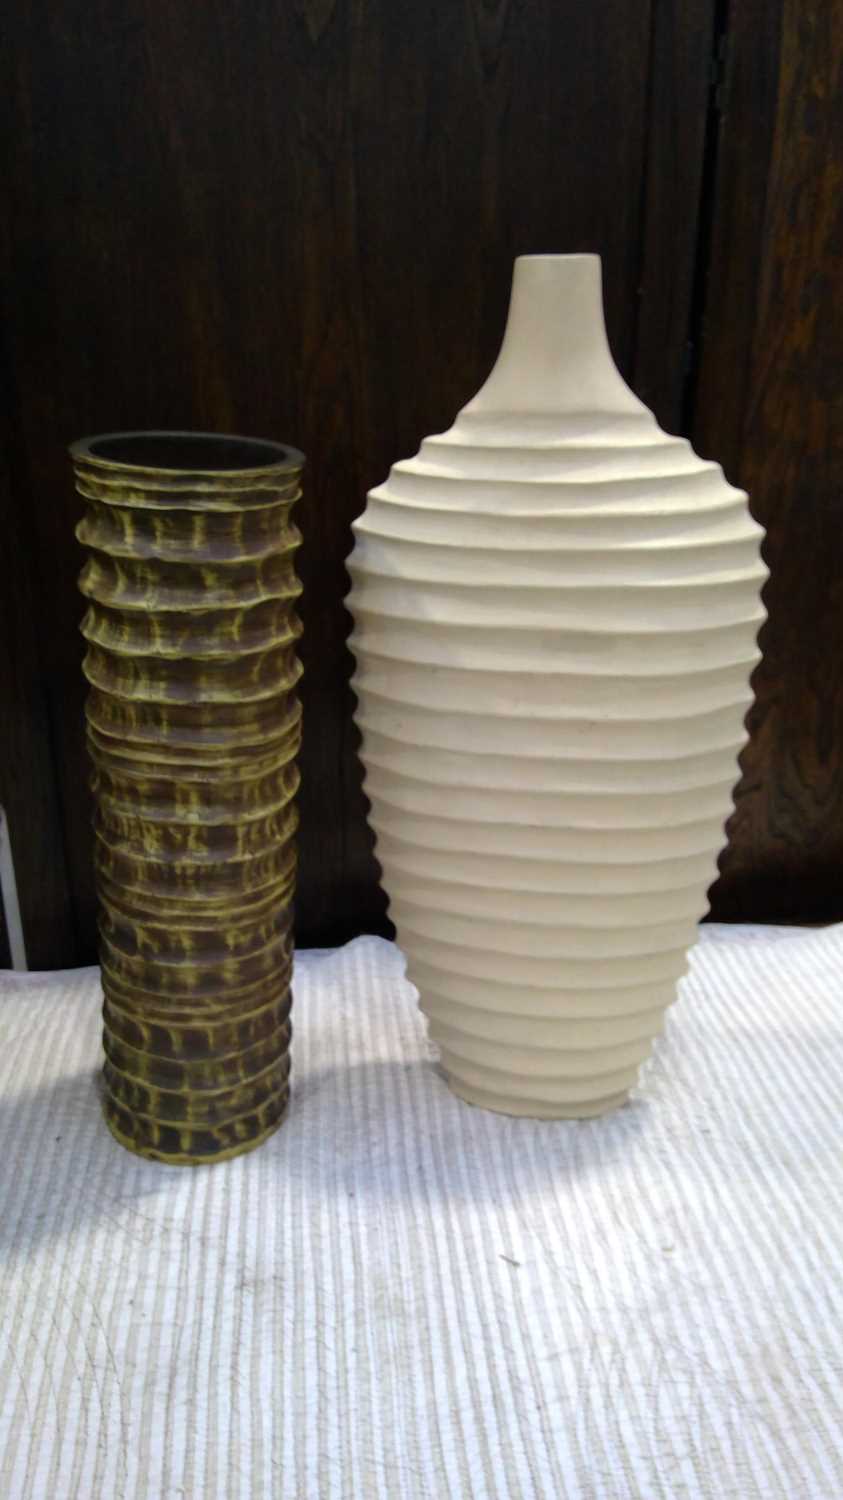 Lot 45 - Two resin Vases the tallest being 64cm